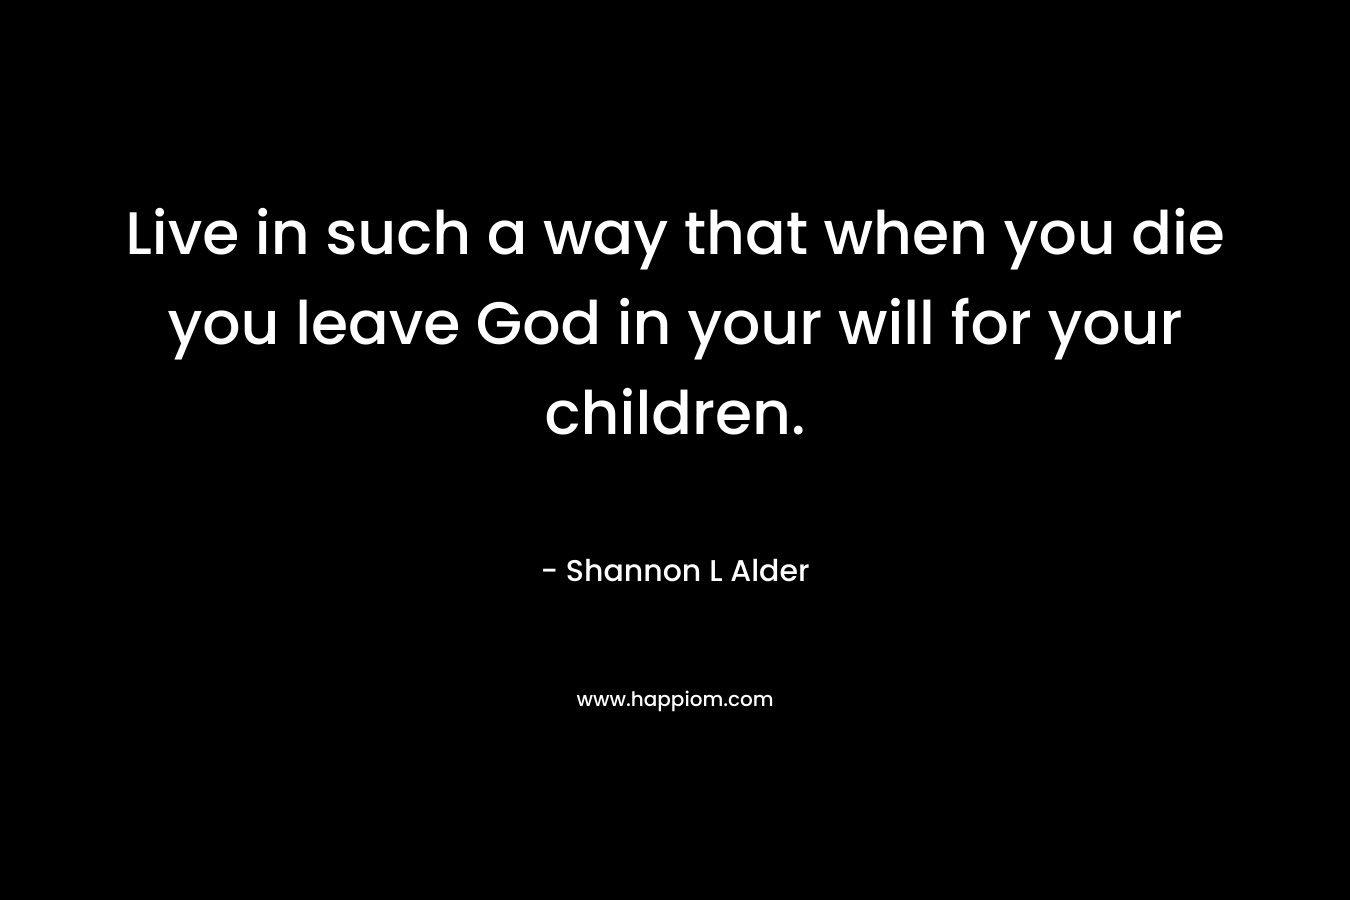 Live in such a way that when you die you leave God in your will for your children.